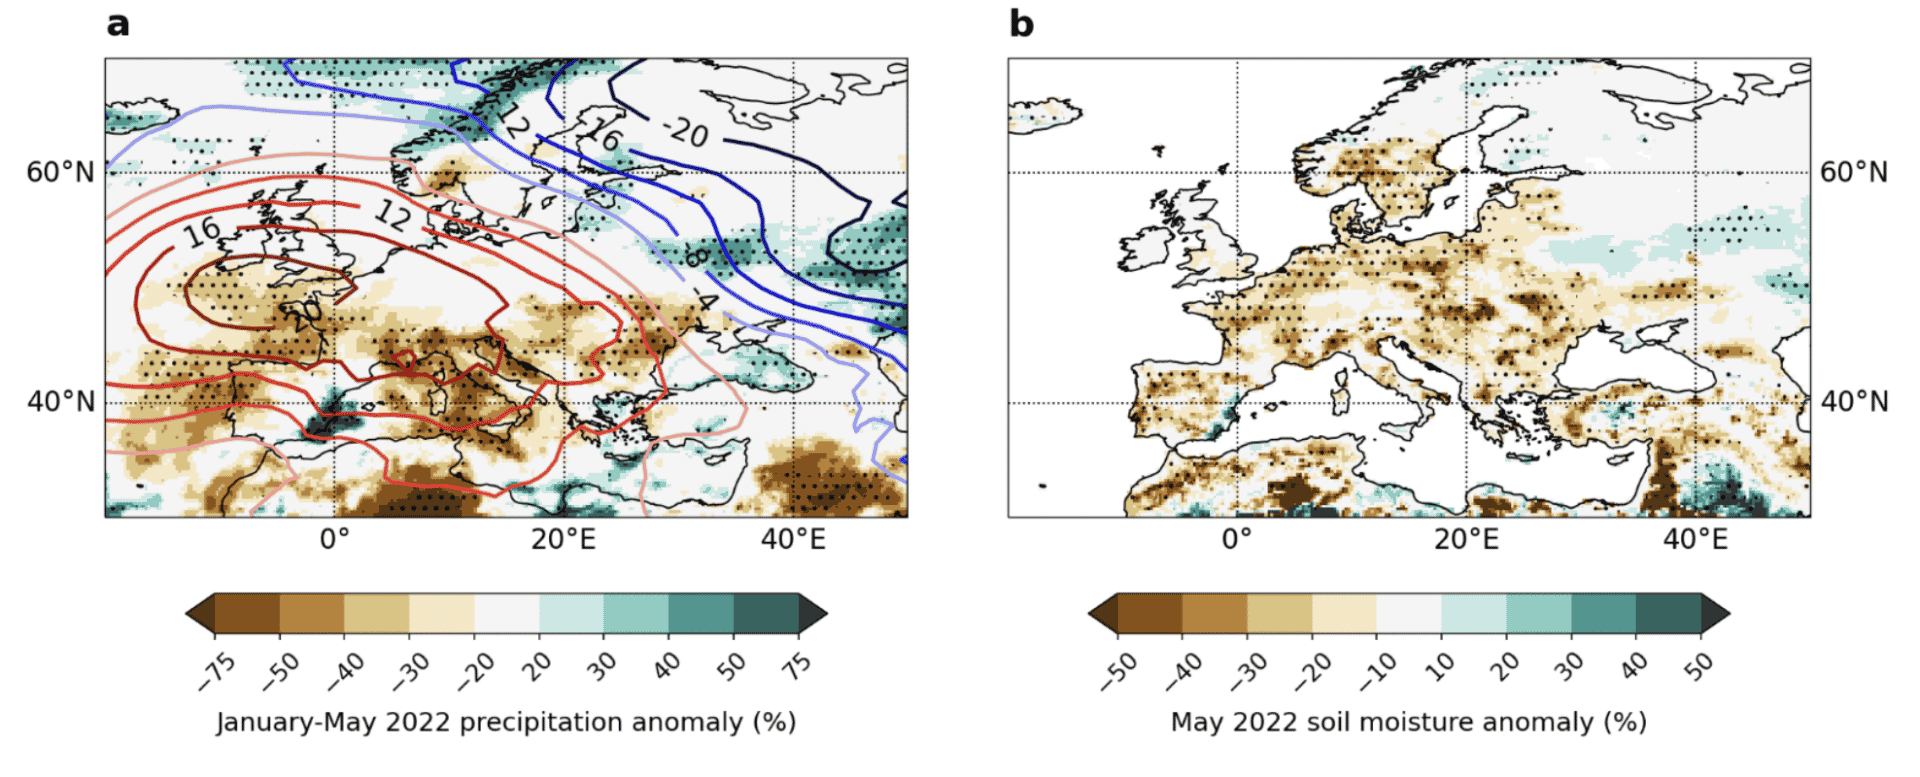 Anomalous dry conditions over Europe in 2022. (a) Anomalies in (a) January-May accumulated precipitation (%, shaded) and sea-level pressure (hPa, contours) in 2022. (b) Relative anomalies in May-average top 1 meter soil moisture for May 2022. Dots in all panels indicate top 3 wettest/driest seasons since 1979. Data is from ERA5 reanalysis (1979-2022).